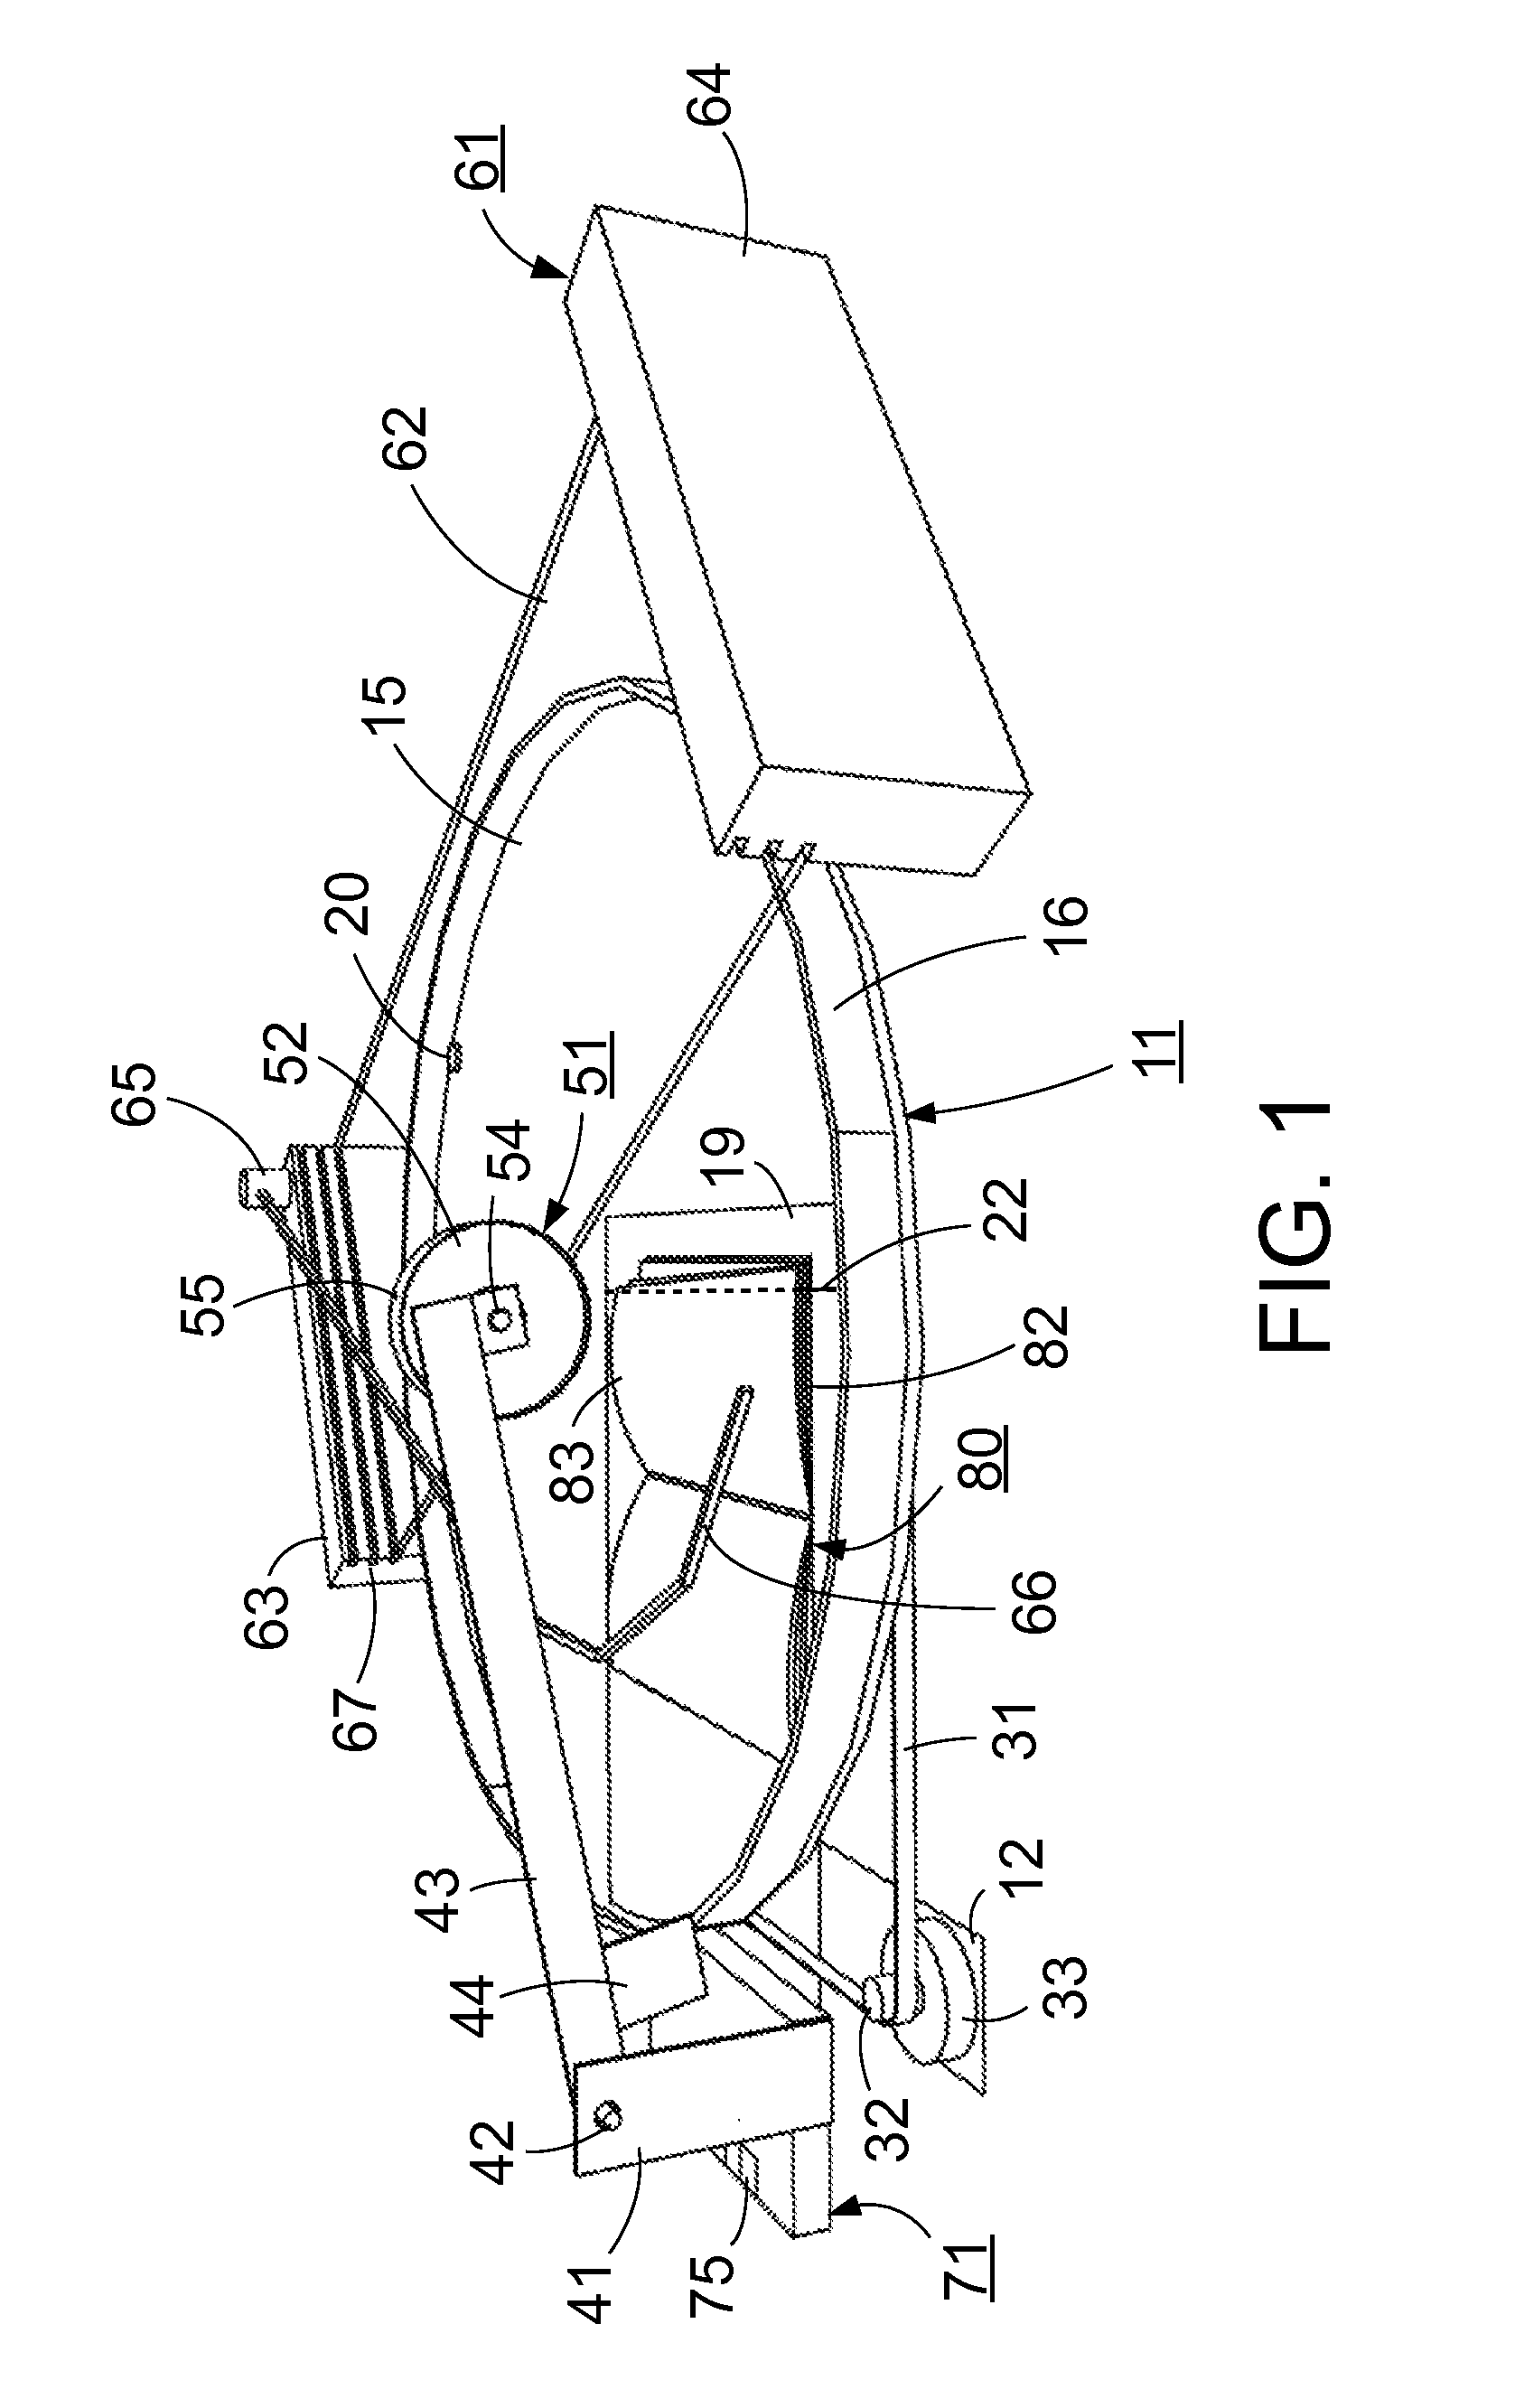 System and method for automatic page turning for book imaging